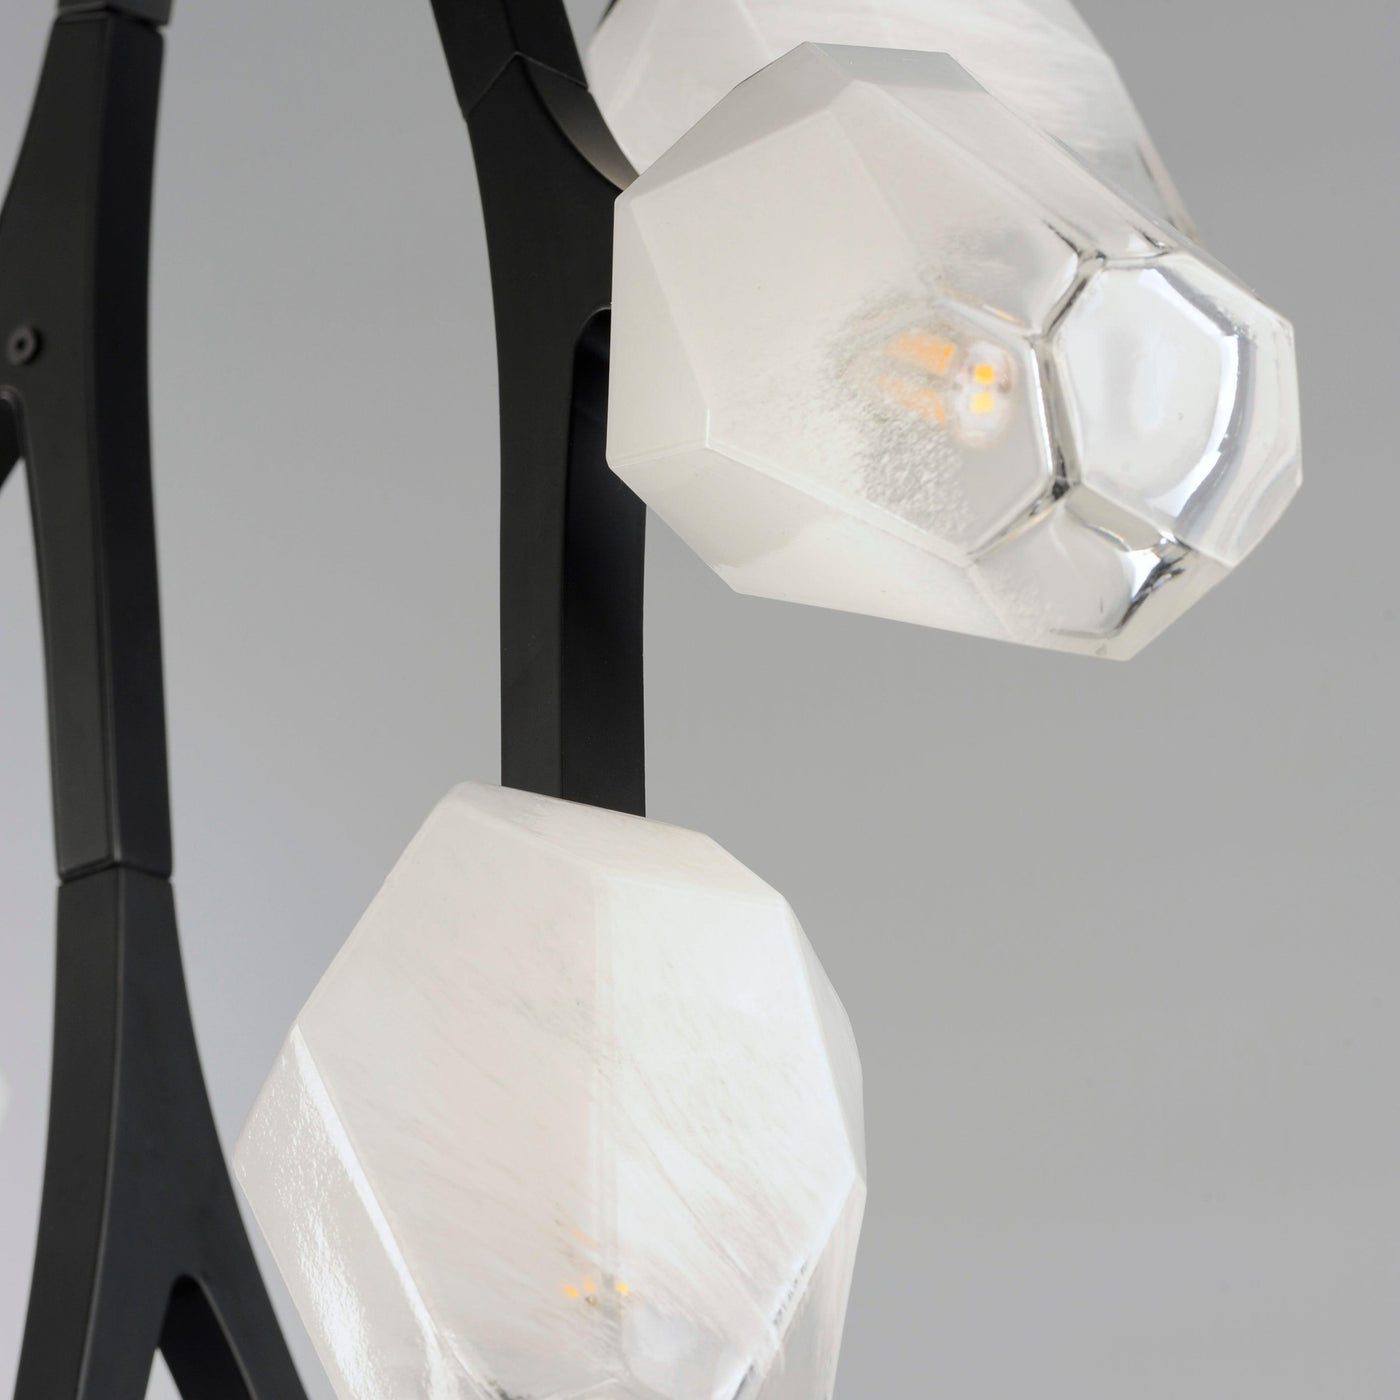 LED Black Bloom Branches With Frosted Glass Pendant - LV LIGHTING